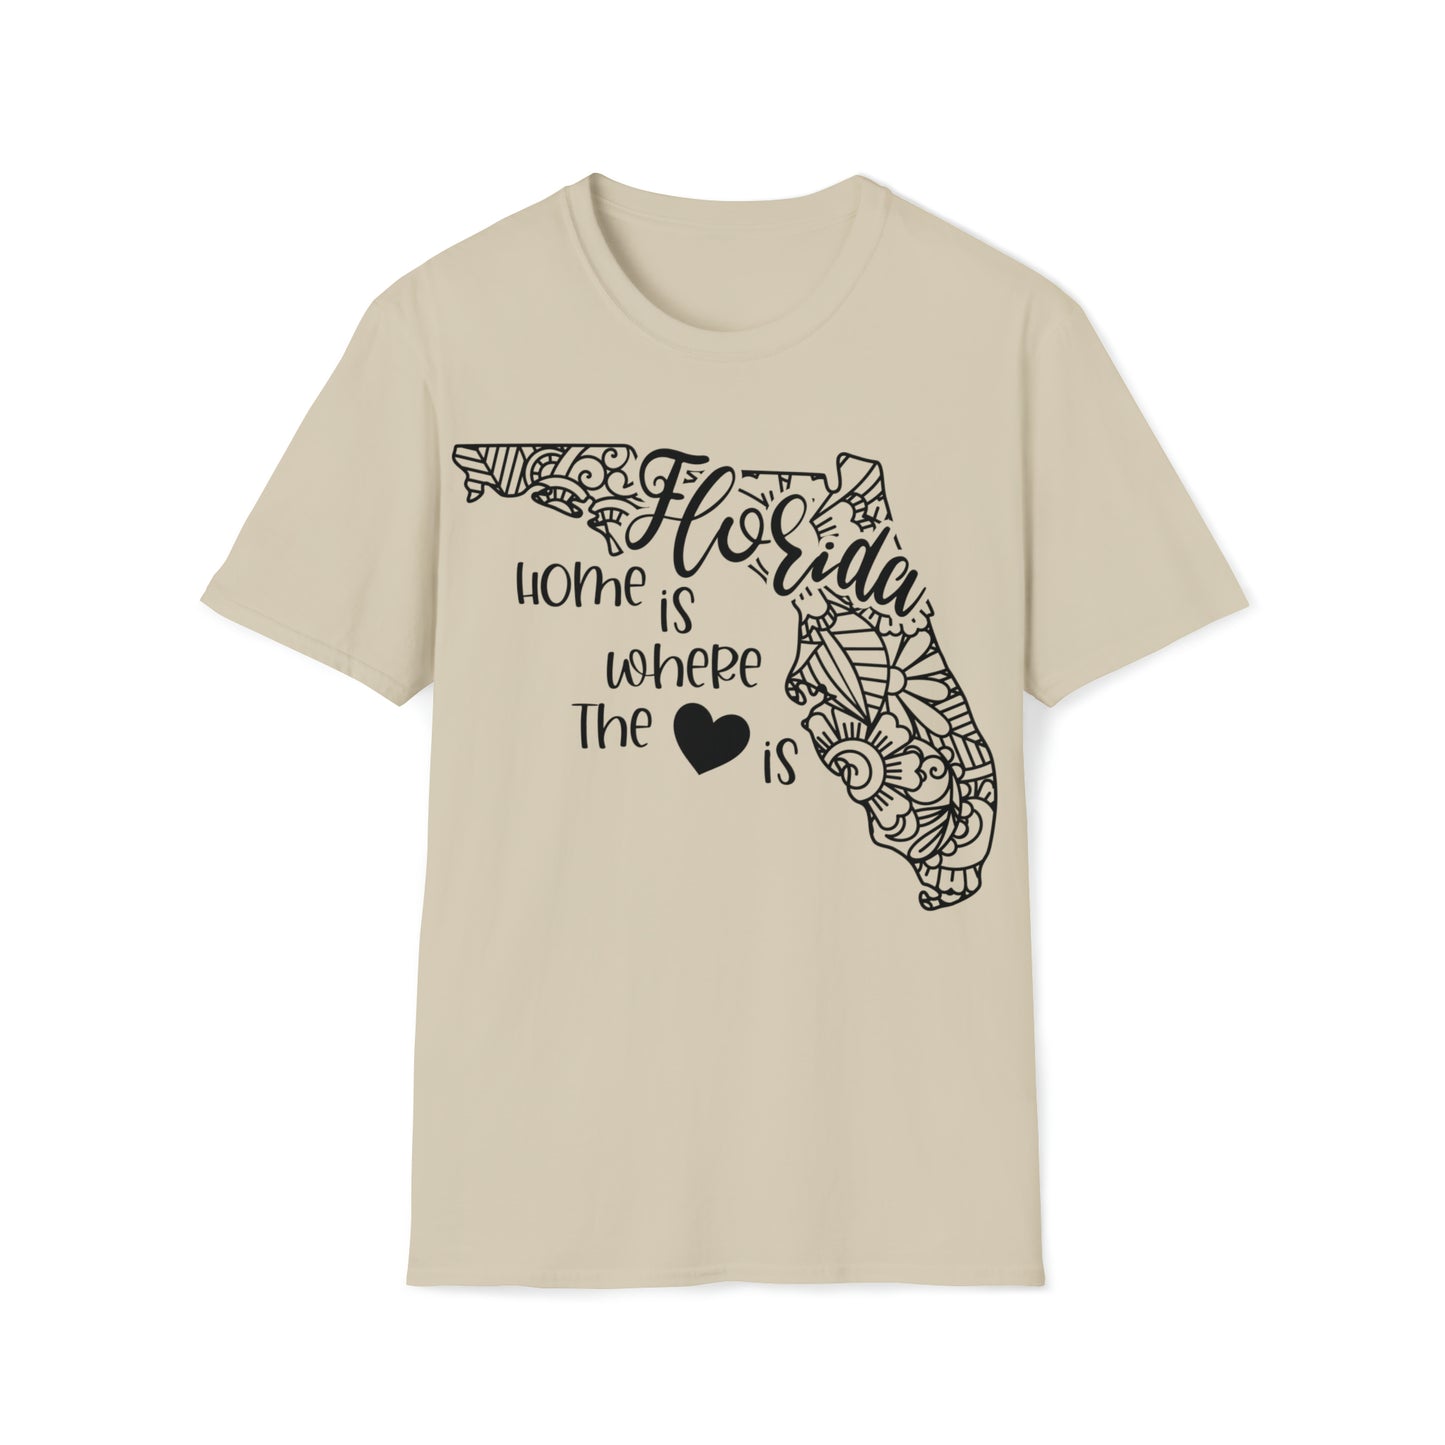 Florida is Where the Heart is T-Shirt